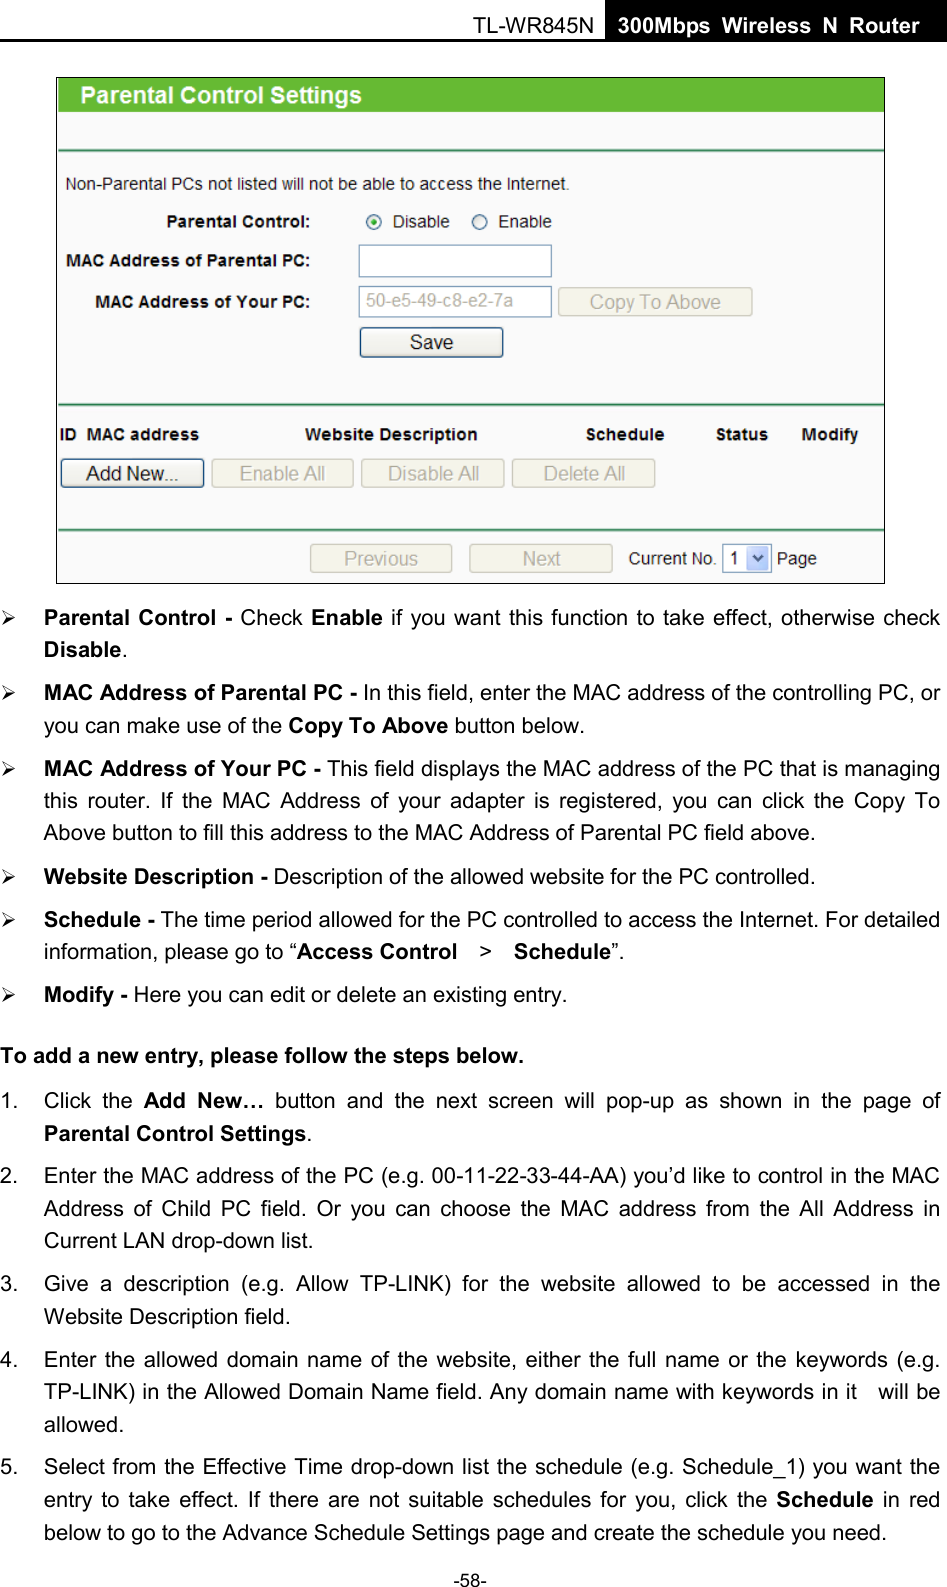  TL-WR845N  300Mbps Wireless N Router      Parental Control  - Check Enable if you want this function to take effect, otherwise check Disable.    MAC Address of Parental PC - In this field, enter the MAC address of the controlling PC, or you can make use of the Copy To Above button below.    MAC Address of Your PC - This field displays the MAC address of the PC that is managing this  router. If the MAC Address of your adapter is registered, you can click the Copy To Above button to fill this address to the MAC Address of Parental PC field above.    Website Description - Description of the allowed website for the PC controlled.    Schedule - The time period allowed for the PC controlled to access the Internet. For detailed information, please go to “Access Control  &gt;   Schedule”.    Modify - Here you can edit or delete an existing entry.   To add a new entry, please follow the steps below. 1.  Click the Add New… button and the next screen will pop-up as shown in the page of Parental Control Settings. 2. Enter the MAC address of the PC (e.g. 00-11-22-33-44-AA) you’d like to control in the MAC Address of Child PC field.  Or you can choose the MAC address from the All Address in Current LAN drop-down list. 3. Give a description (e.g. Allow TP-LINK) for the website allowed to be accessed in the Website Description field. 4. Enter the allowed domain name of the website, either the full name or the keywords (e.g. TP-LINK) in the Allowed Domain Name field. Any domain name with keywords in it    will be allowed. 5. Select from the Effective Time drop-down list the schedule (e.g. Schedule_1) you want the entry to take effect. If there are not suitable schedules for you, click the Schedule  in red below to go to the Advance Schedule Settings page and create the schedule you need. -58- 